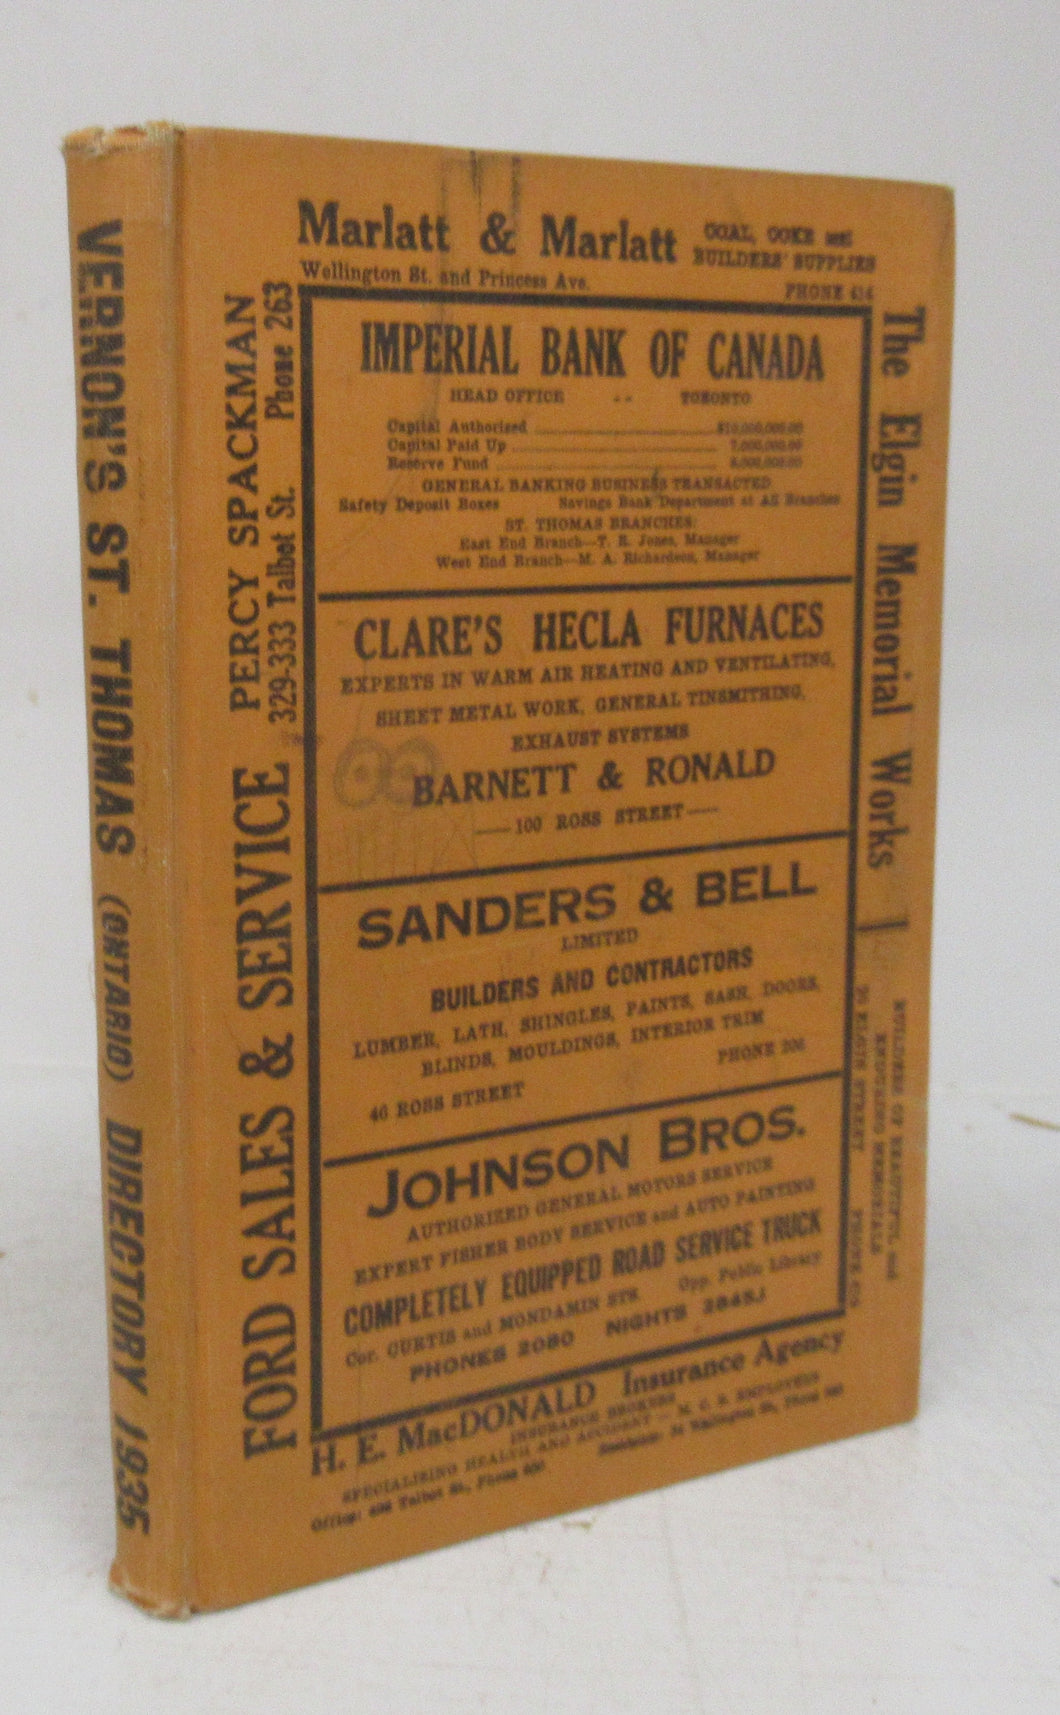 Vernon's City of St. Thomas (Ontario) Miscellaneous, Alphabetical, Street and Business Directory for the year 1935